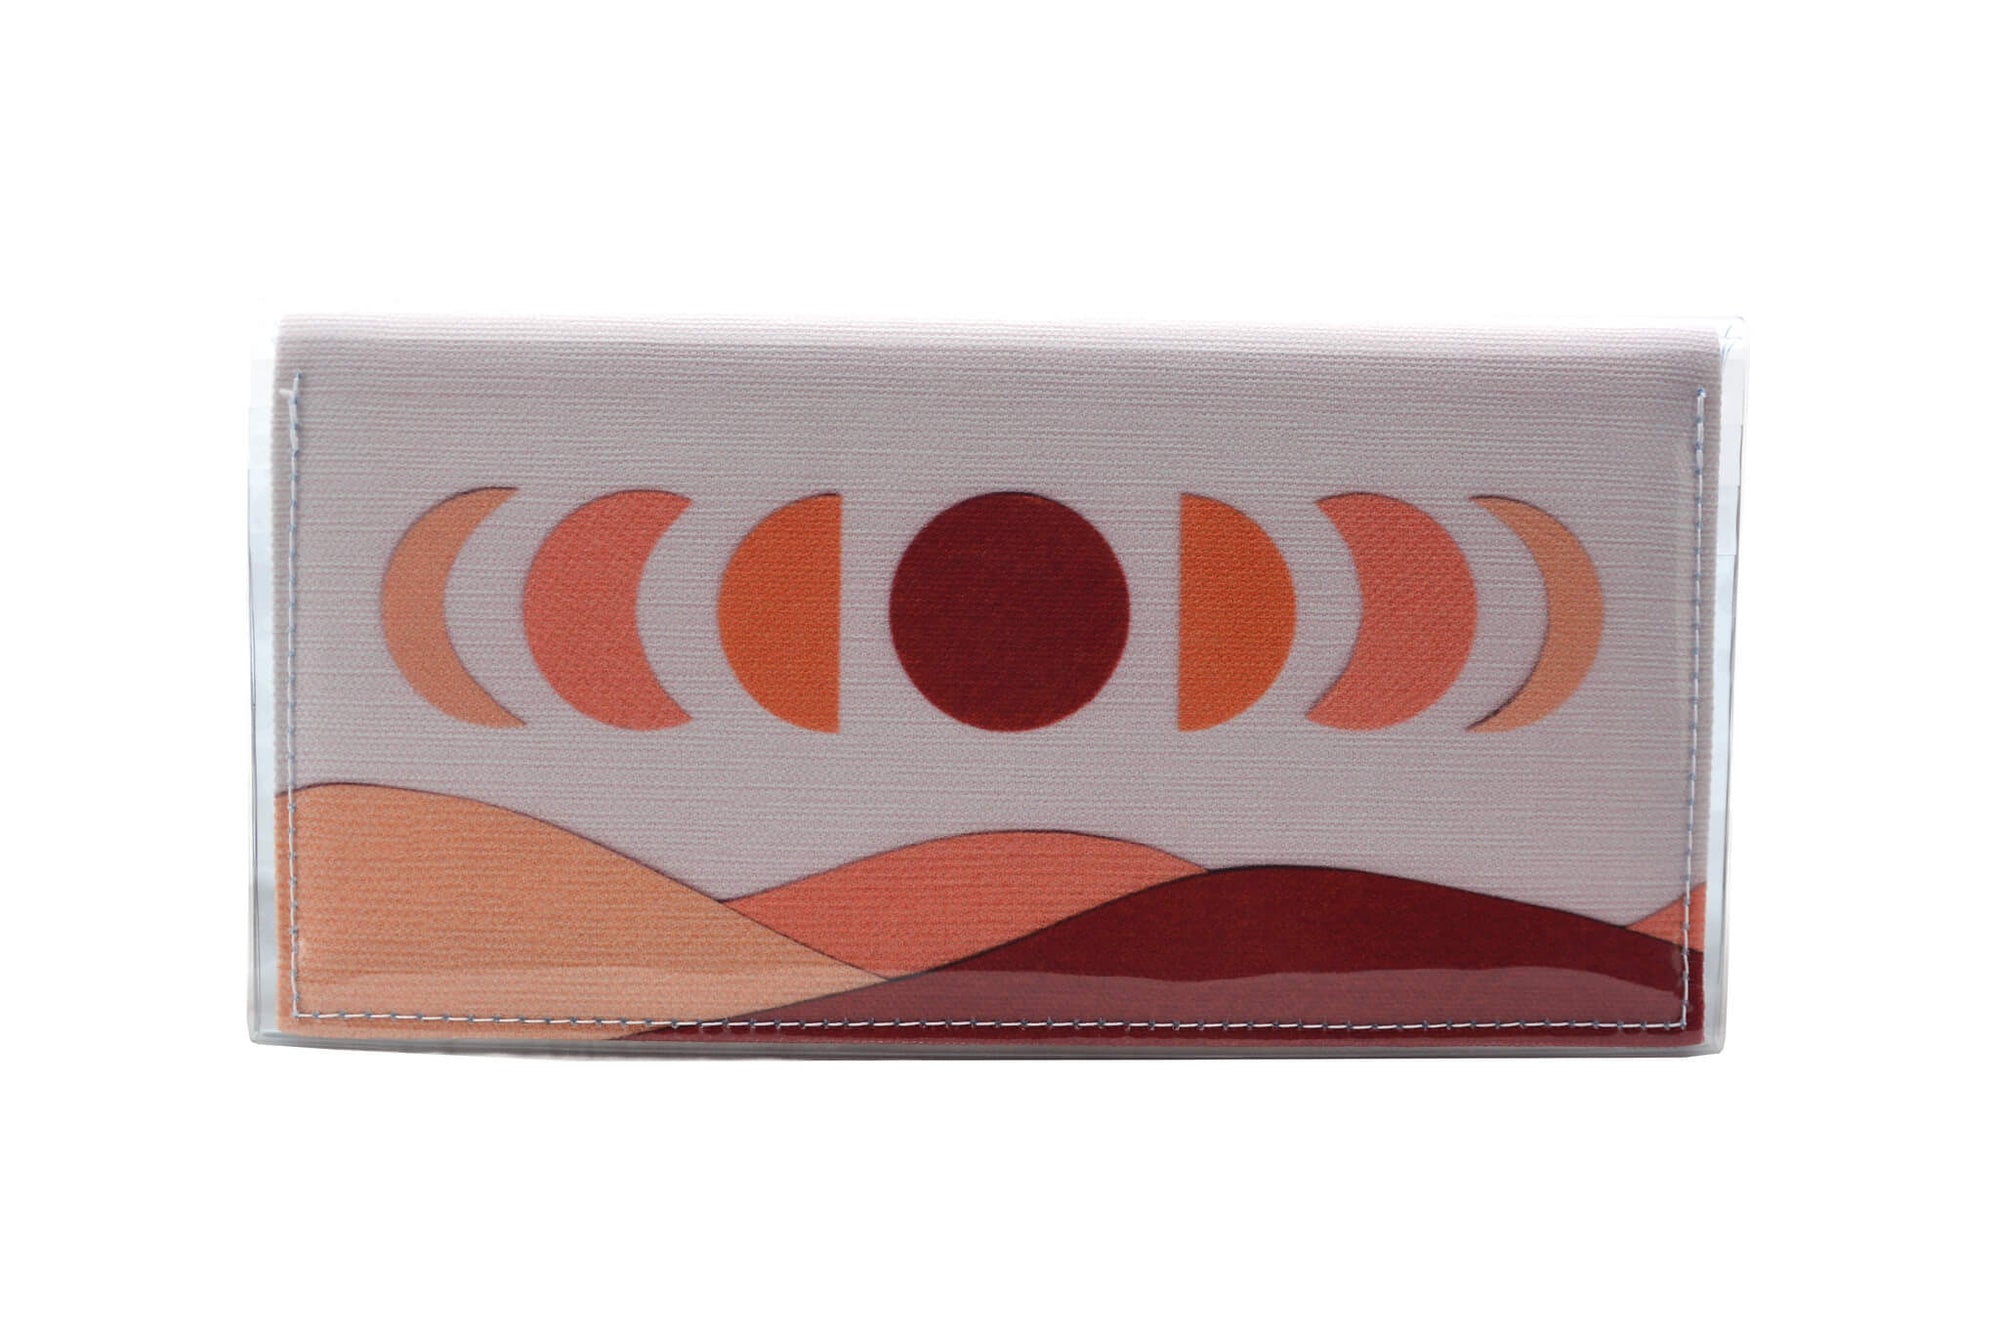 This is the image of the rear of a Kitty Came Home bifold plus purse clutch in 'The same moon shines' design by Satin and Tat. The moon appears in all its phases in a white sky above a landscape lit by the moon's colours: burgundy, oranges and apricot. This is the large size. 